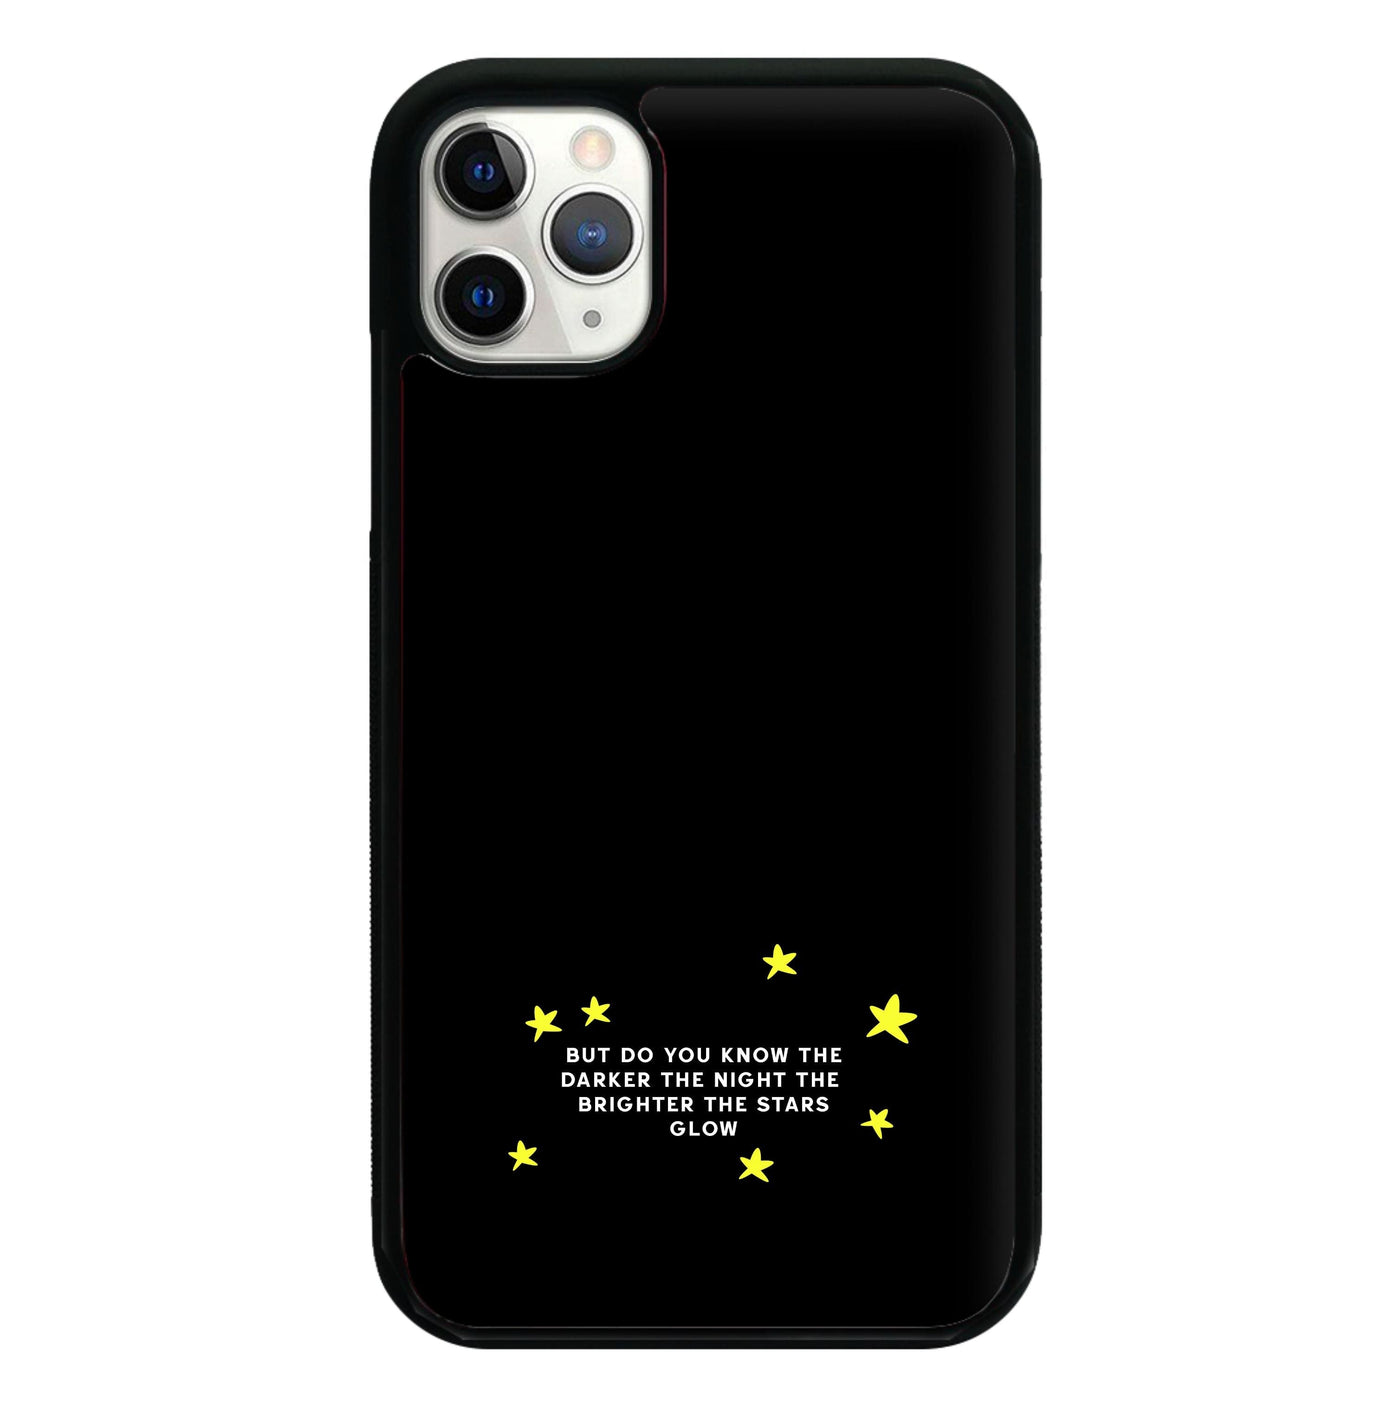 Brighter The Stars Glow - Katy Perry Phone Case